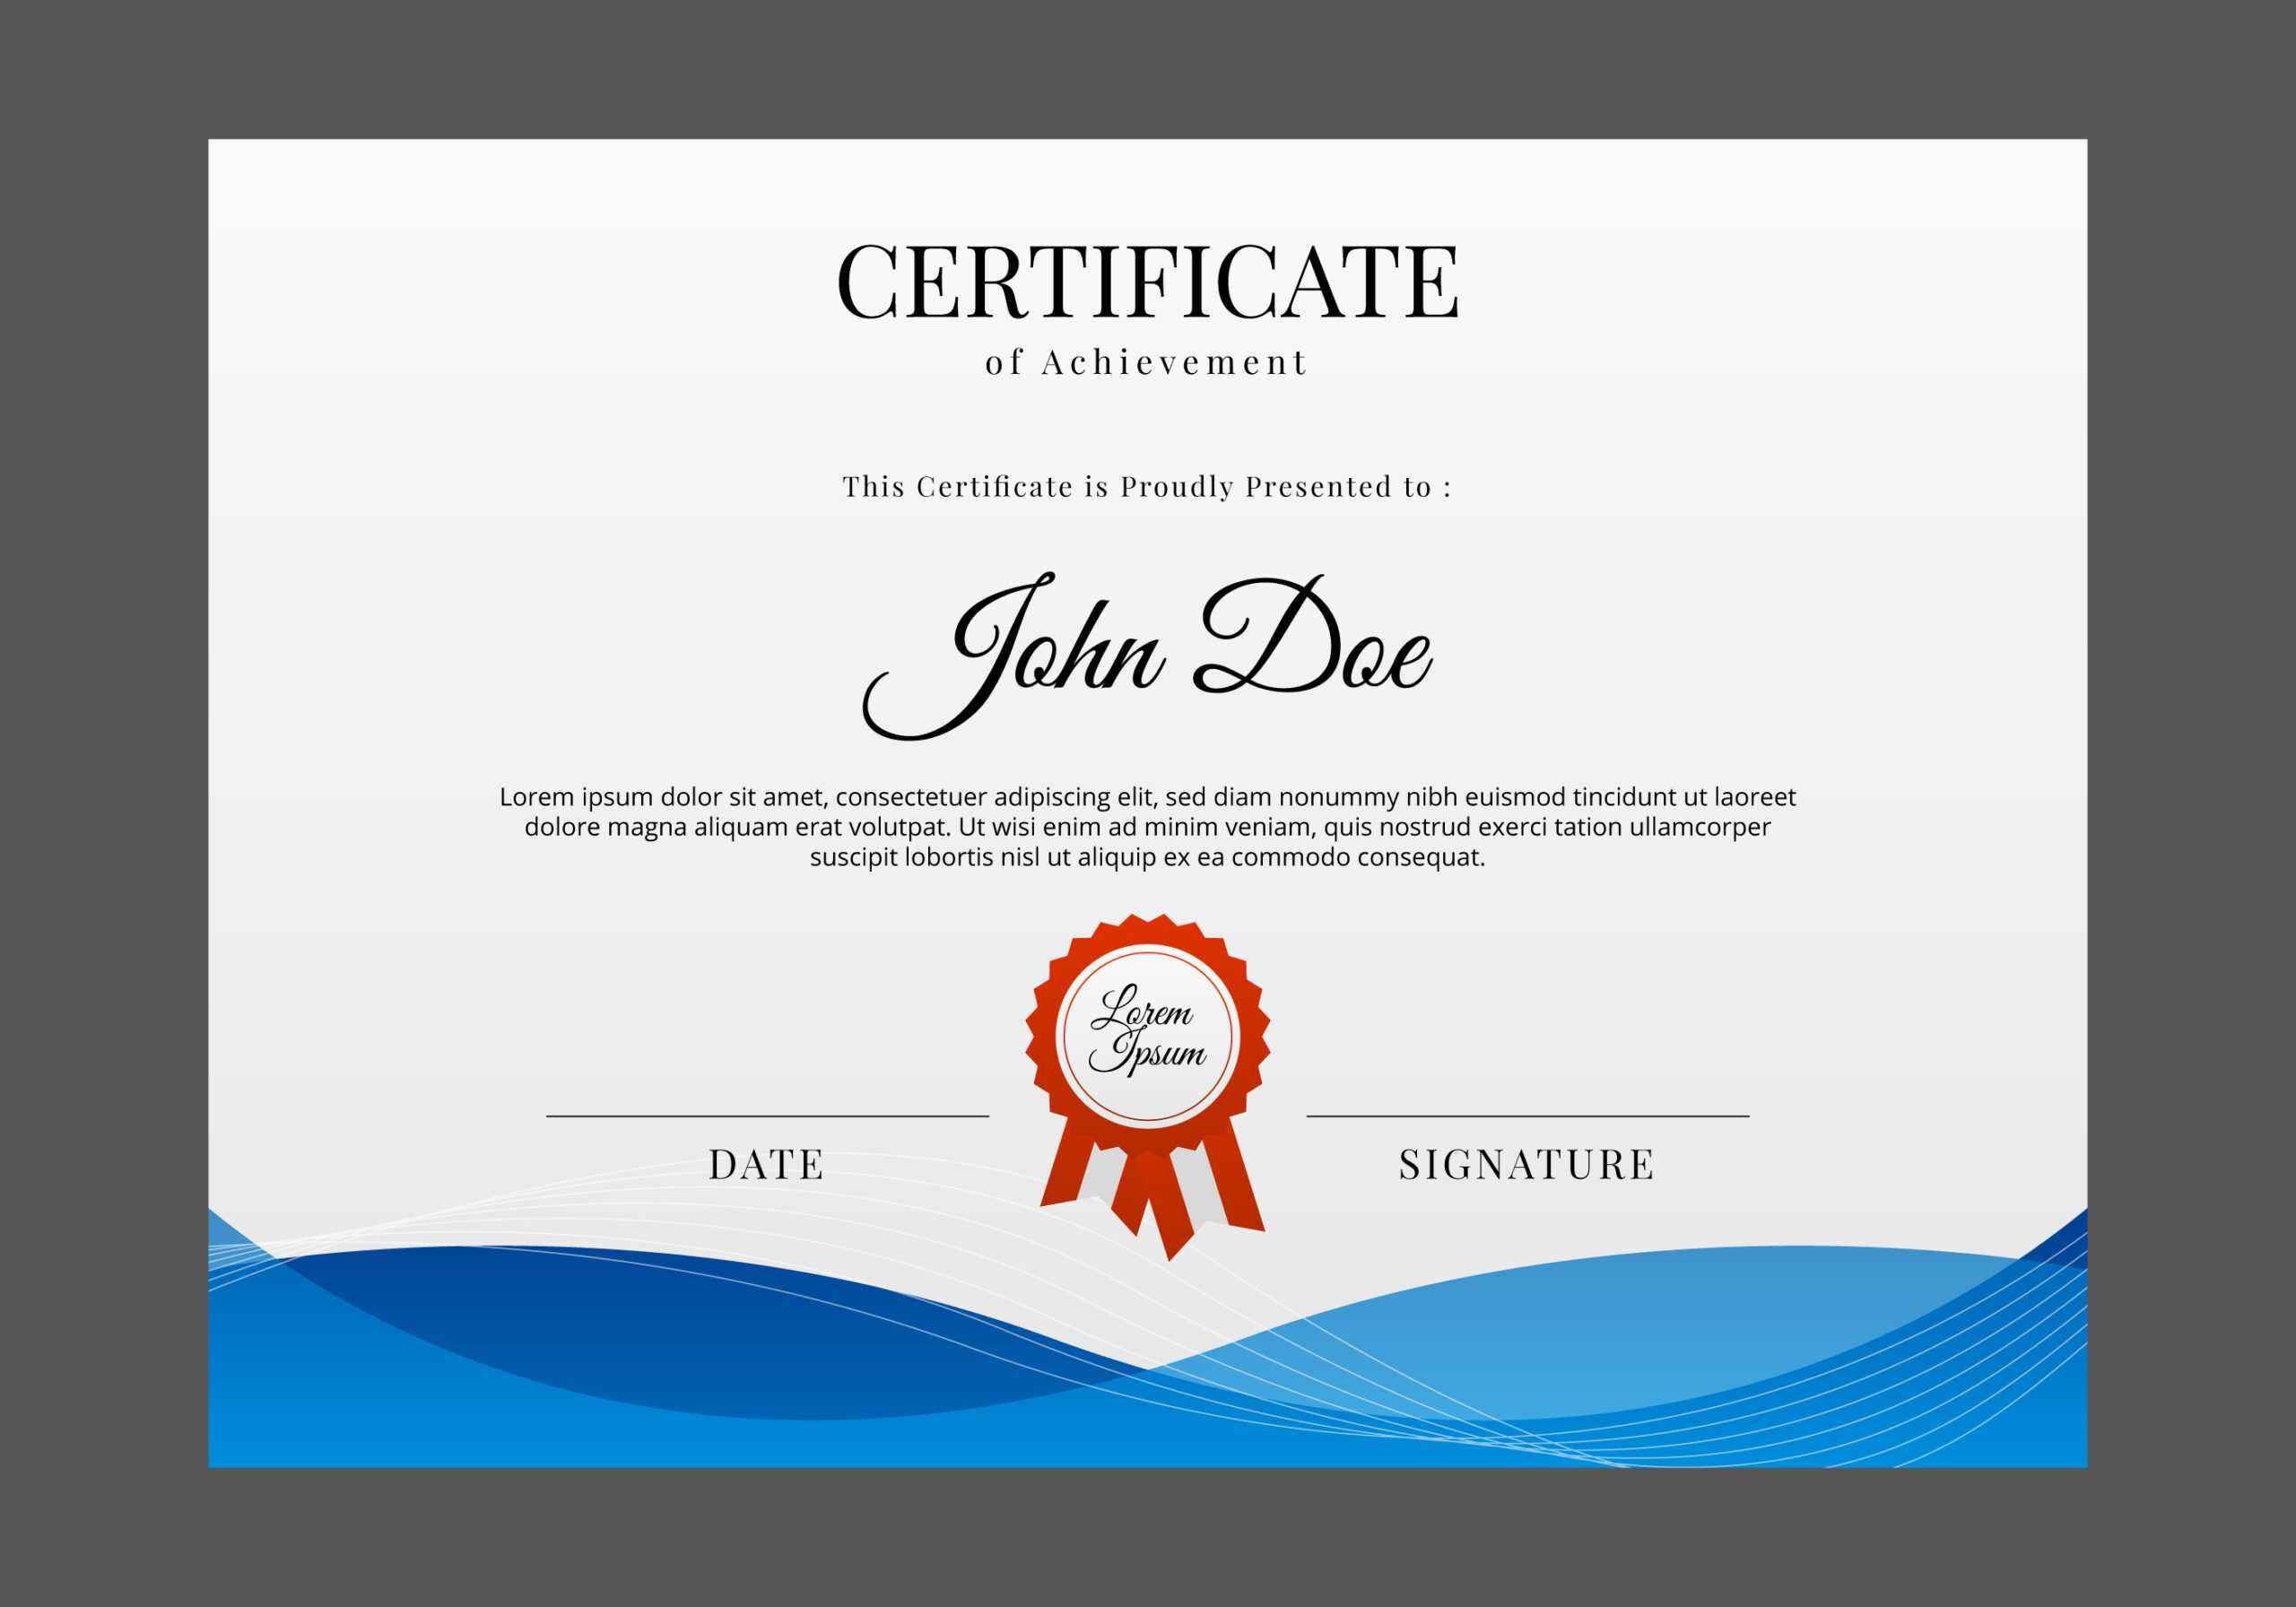 Certificate Templates, Free Certificate Designs Pertaining To Certificate Templates For Word Free Downloads